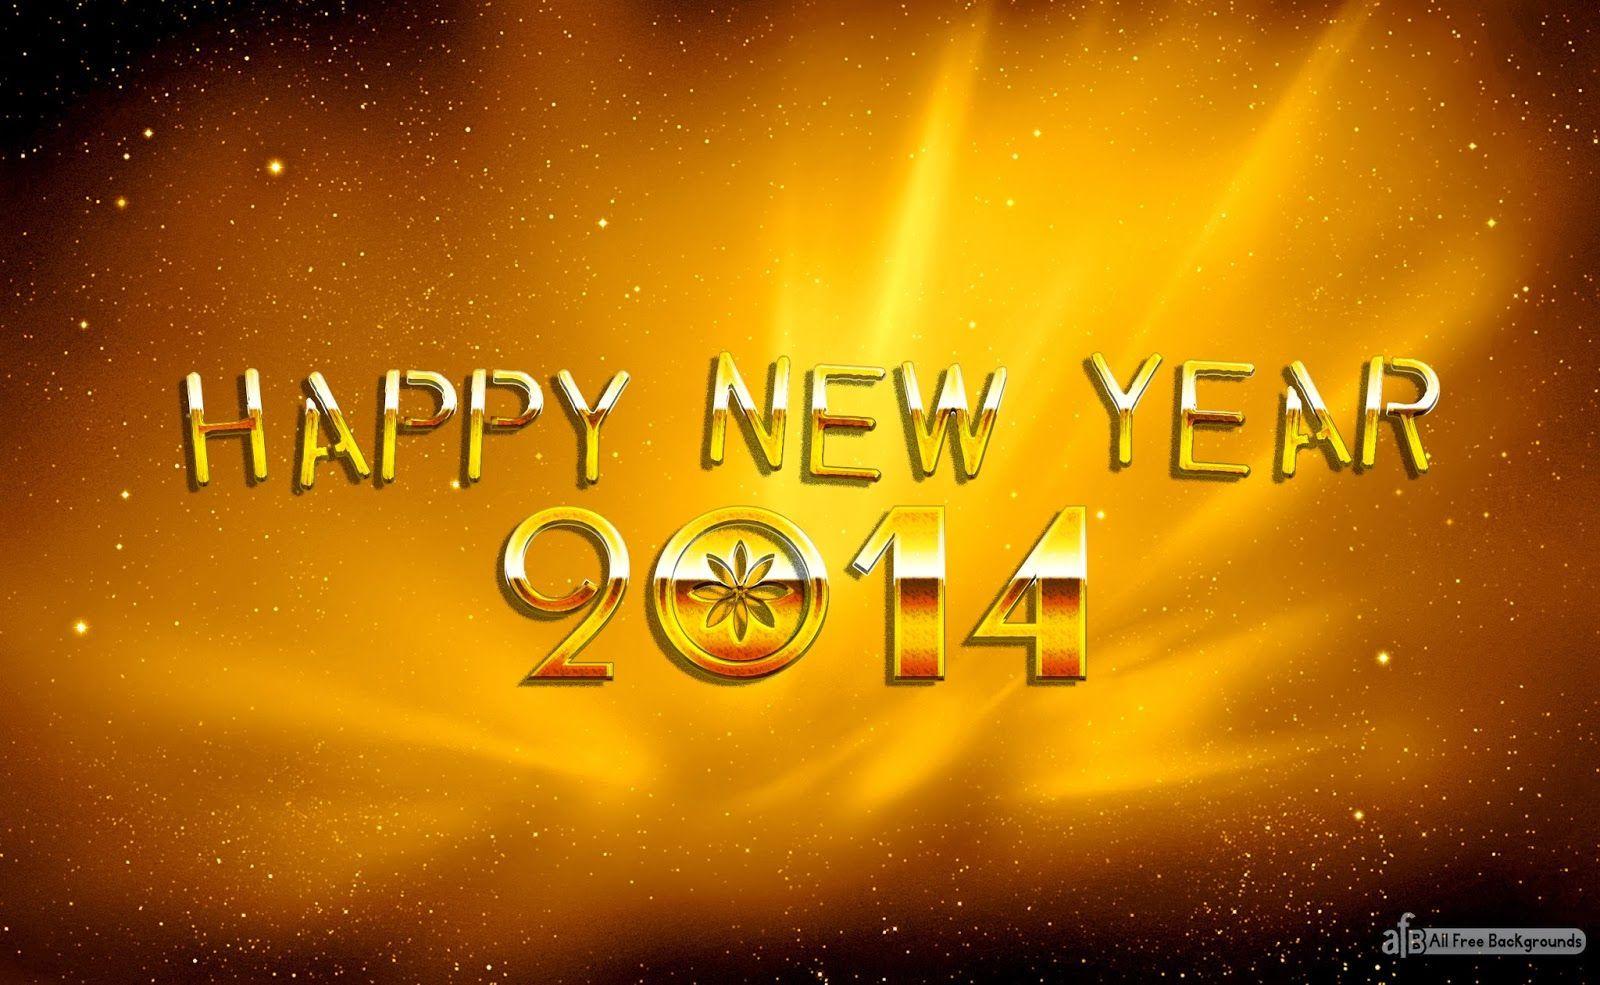 high quality 1600x985 Happy New Year 2014 Golden HD All Free